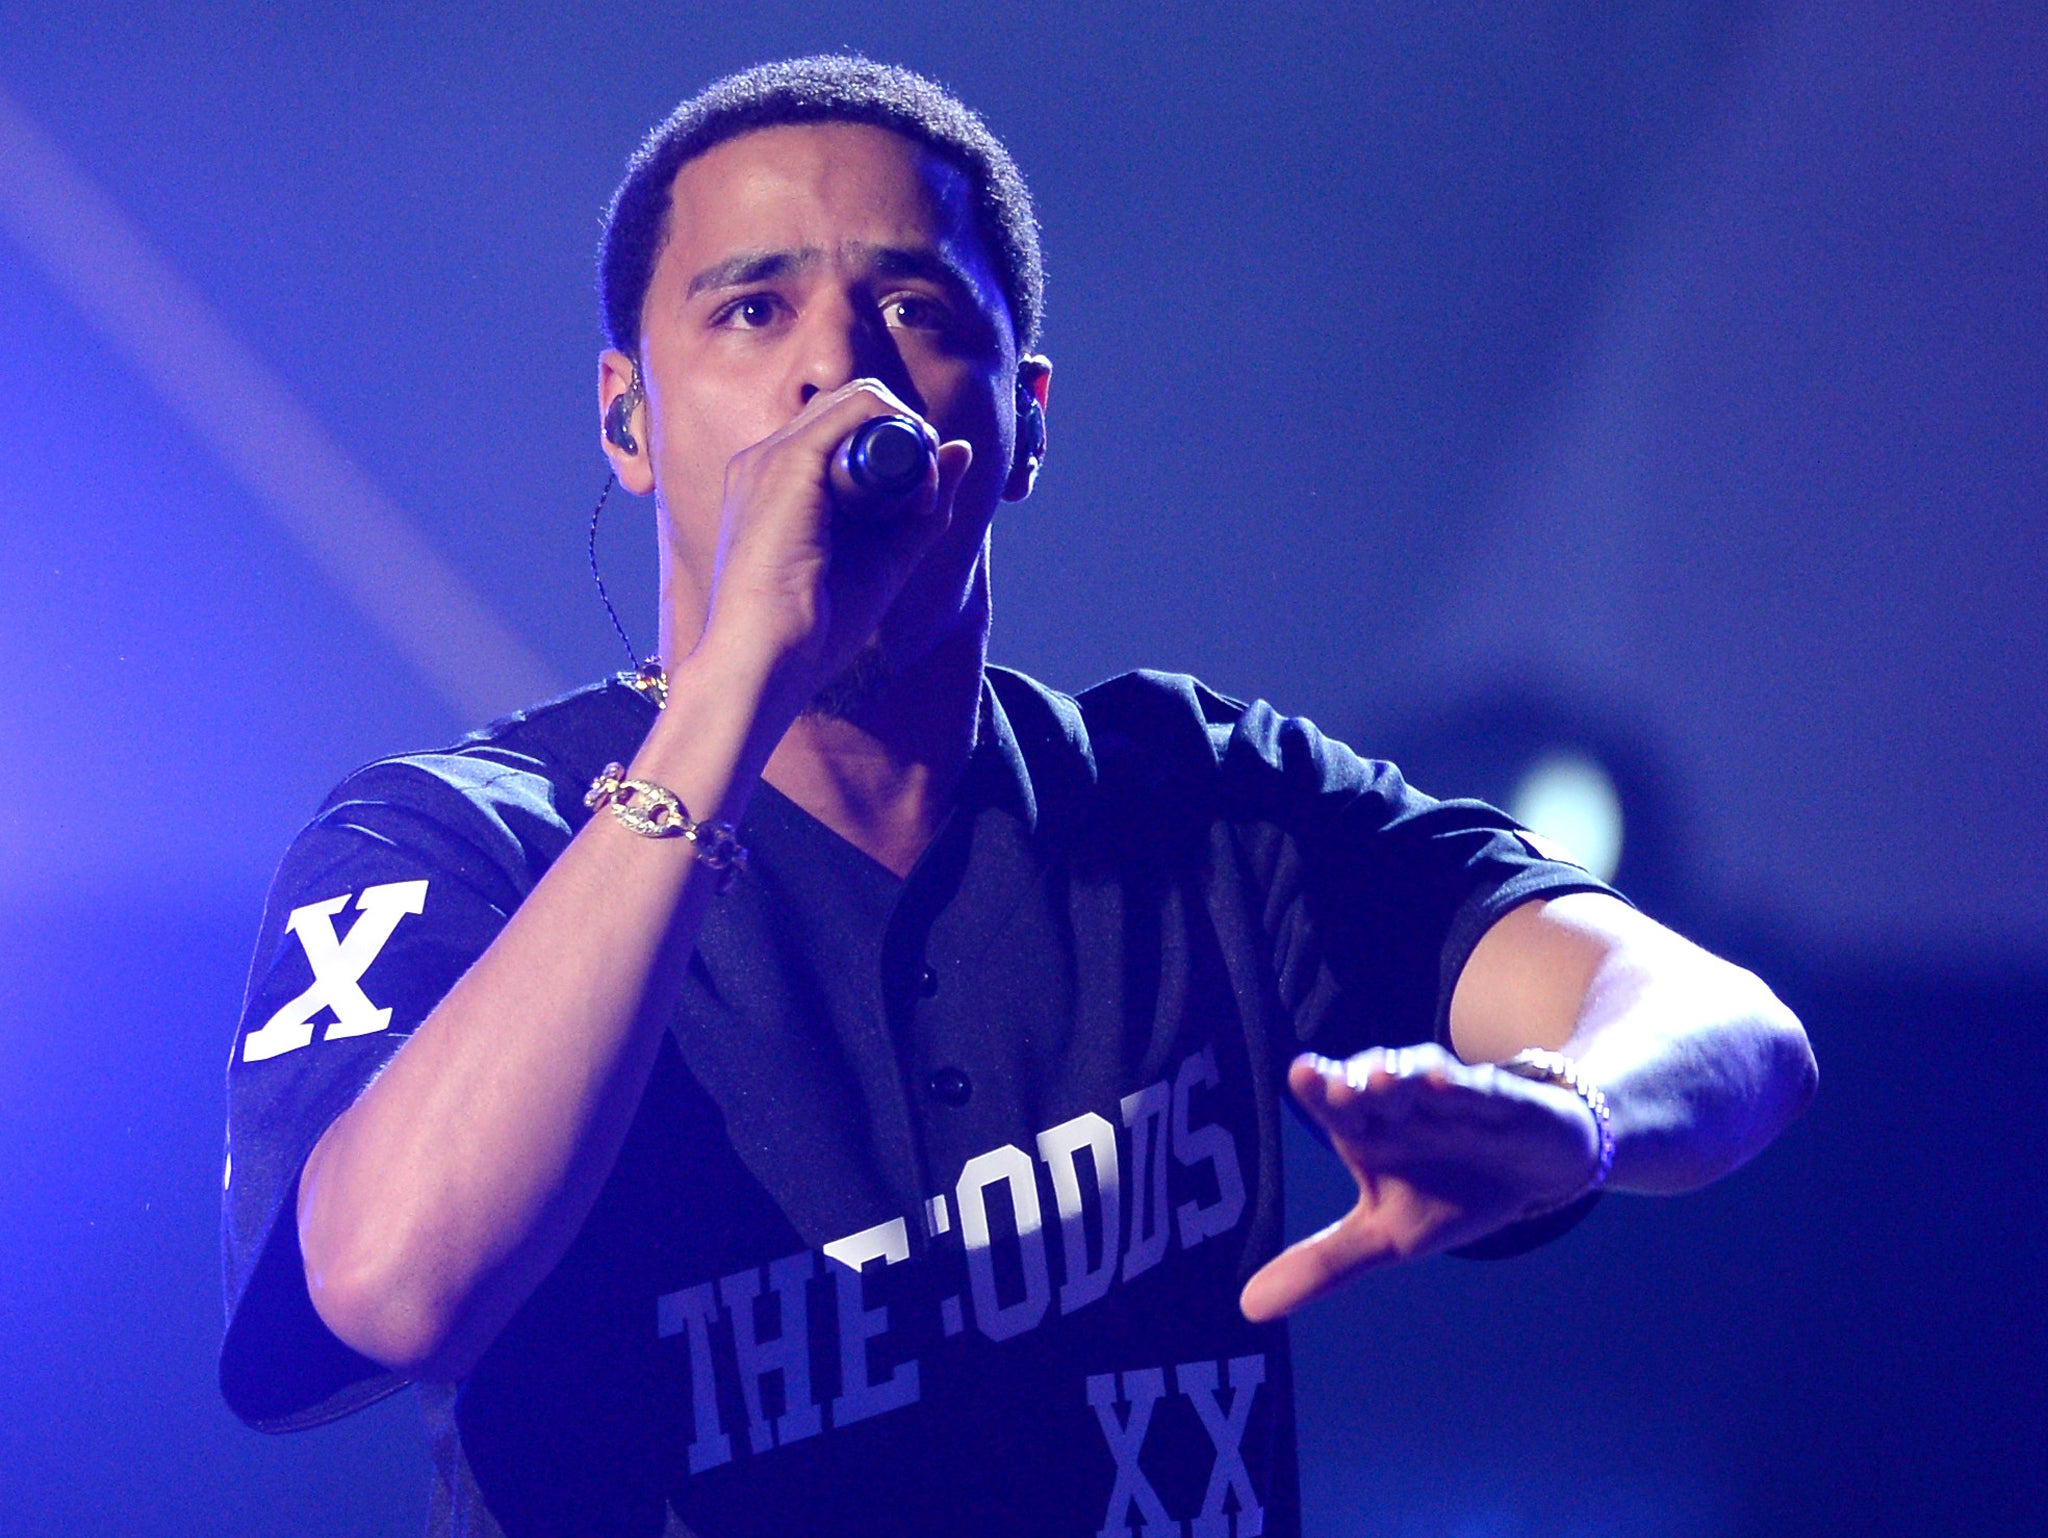 US rapper J Cole has apologised for a lyric in which he calls autistic people retarded